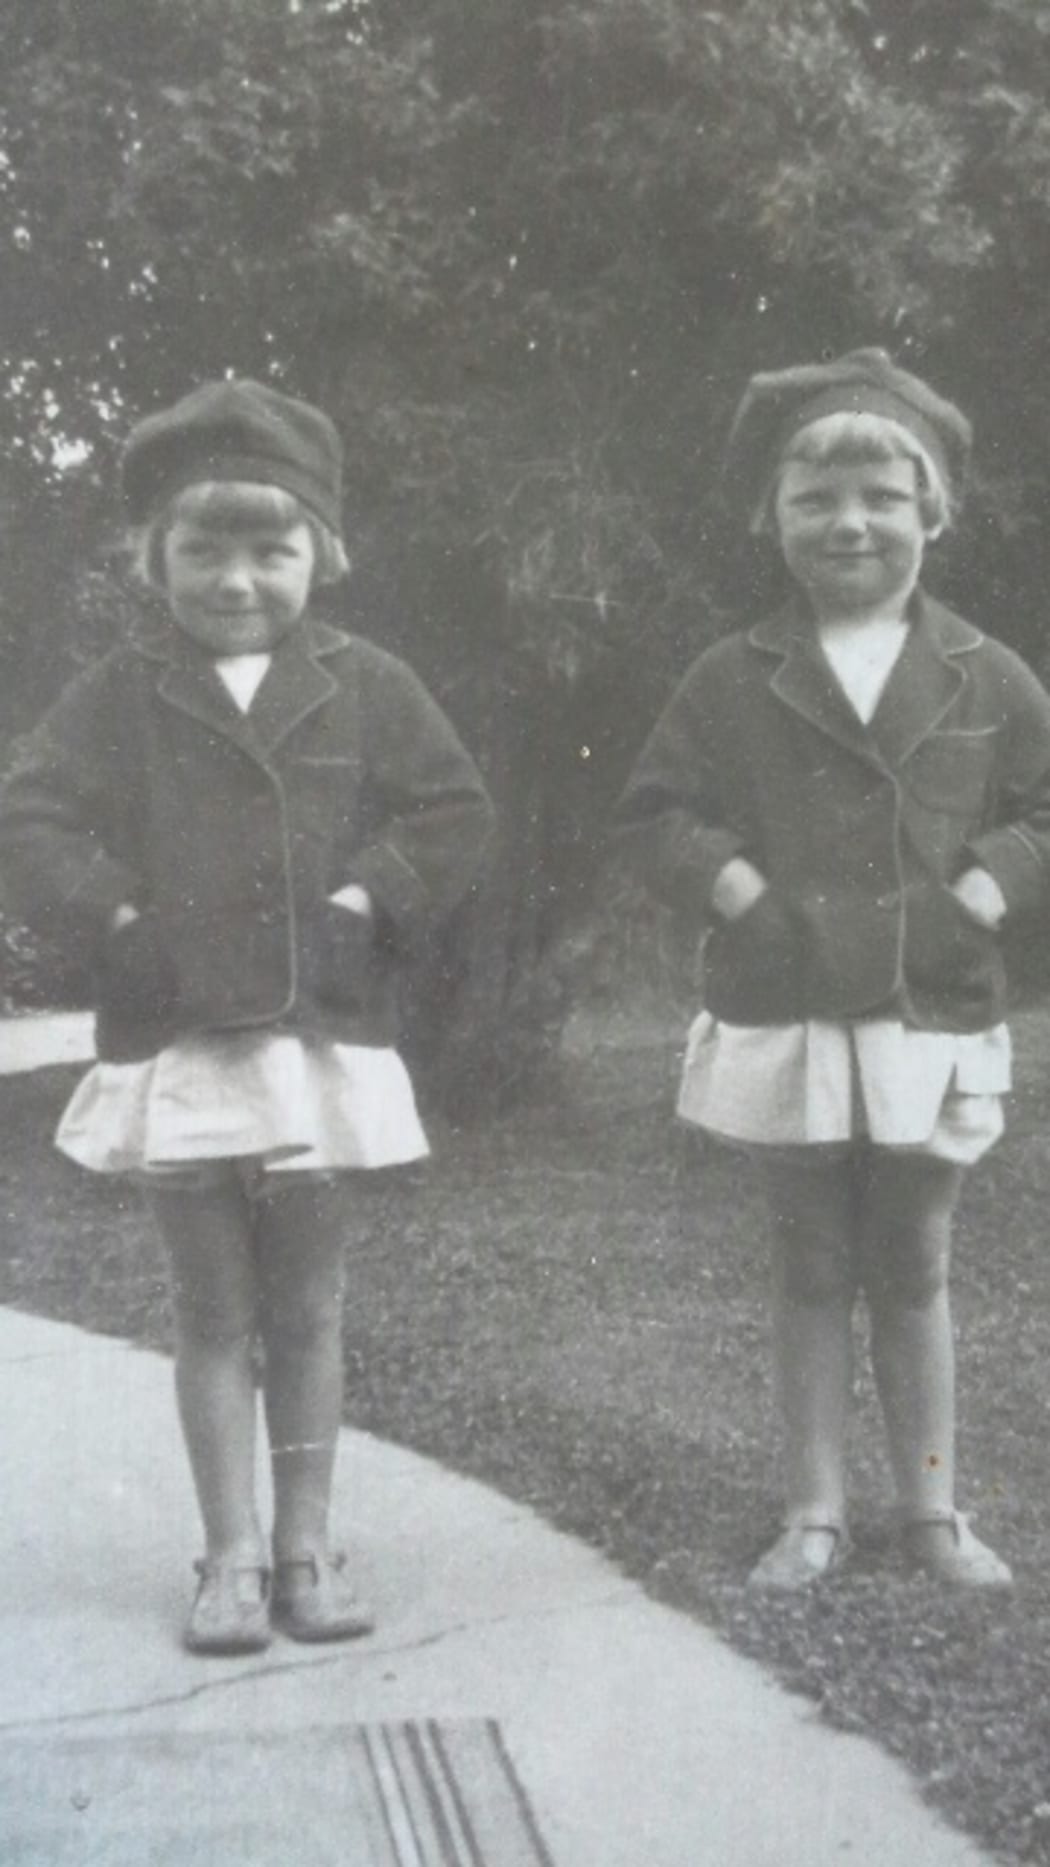 1931 winners of the Caroline Bay Carnival Freckle Face competition